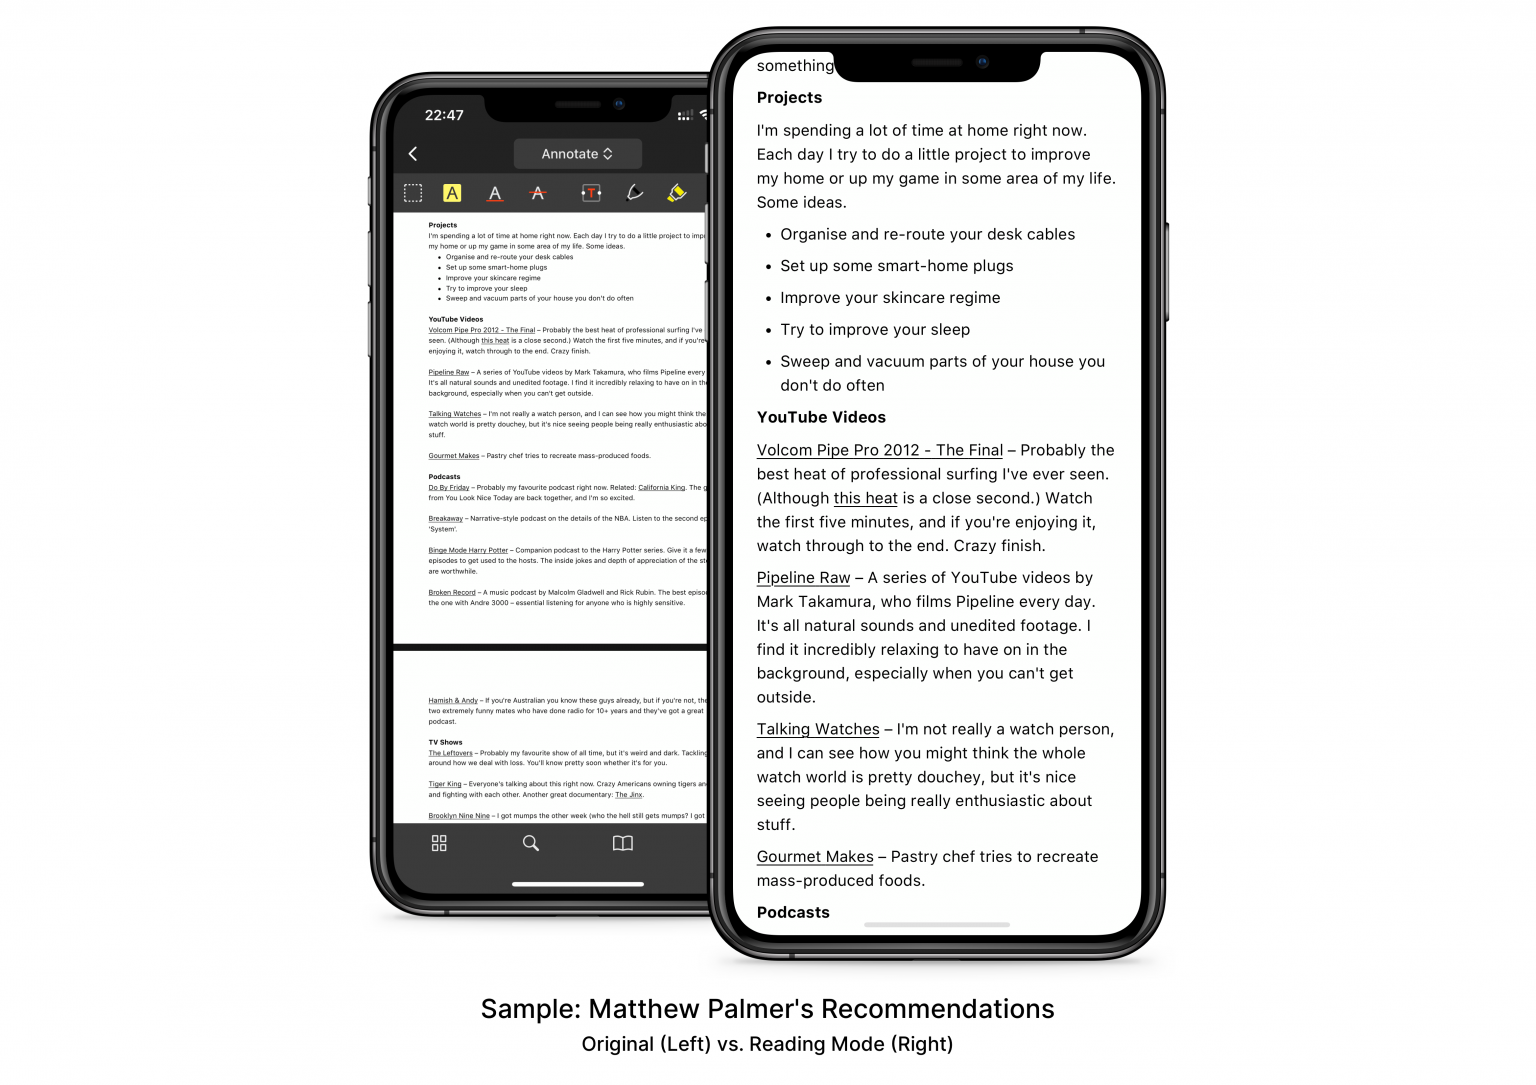 PDF Expert's New Reading Mode Makes it Easier to Read PDFs on iPhone ...